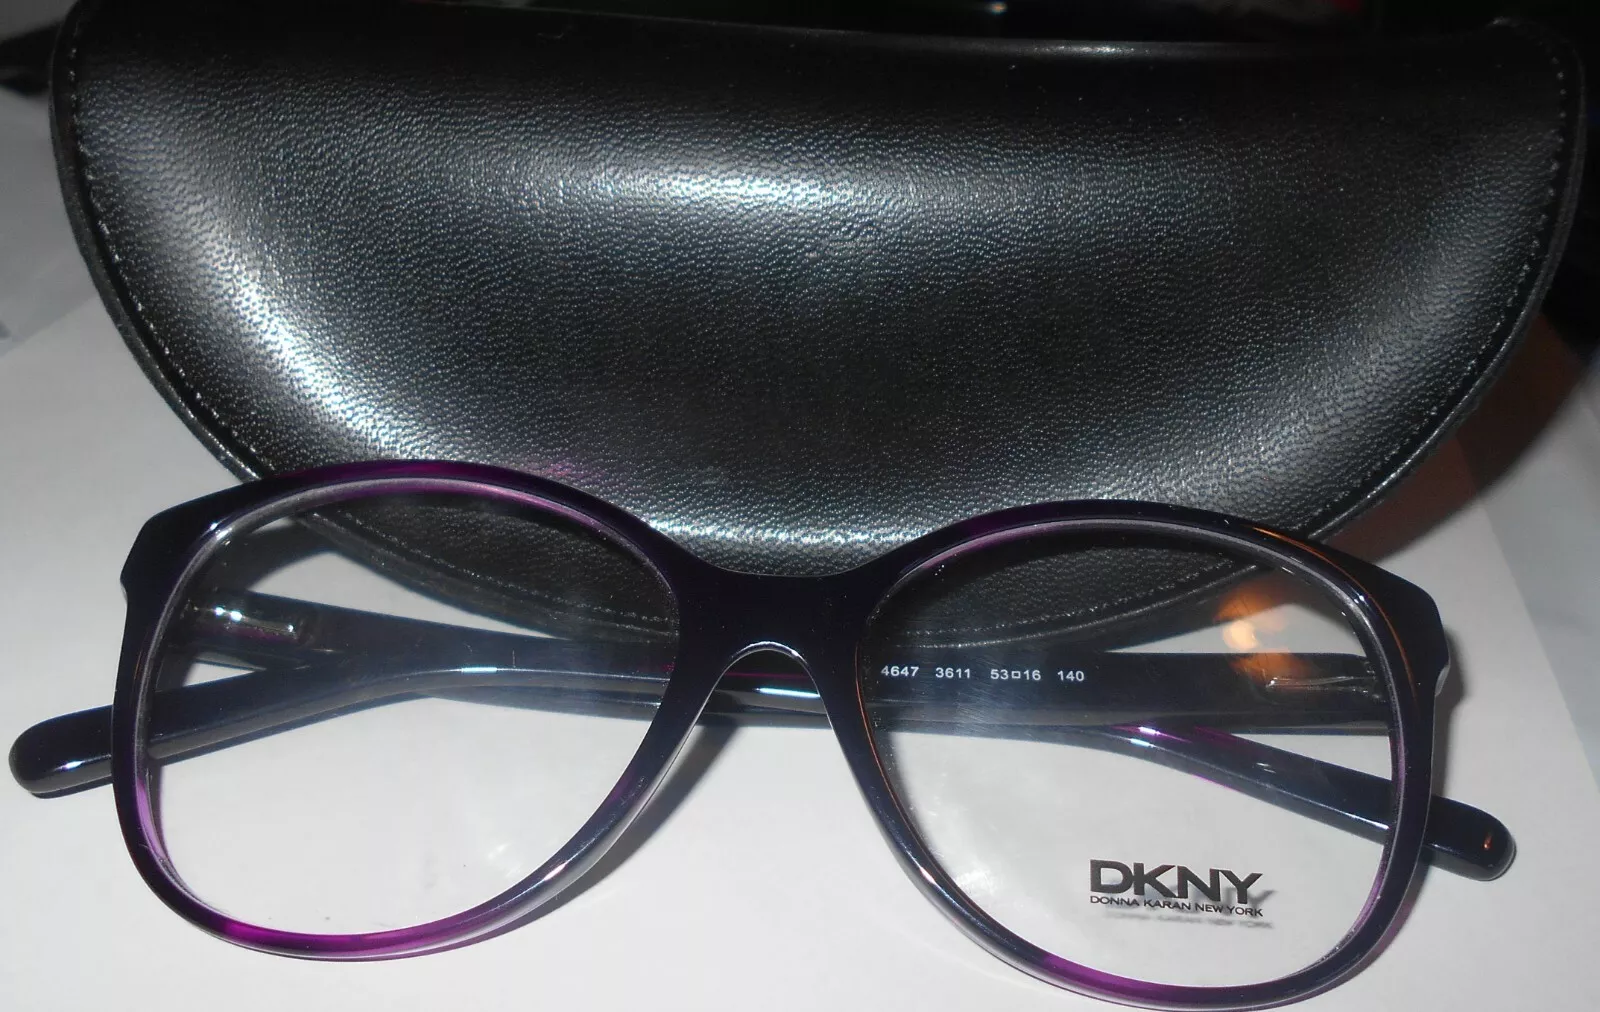 DNKY Glasses/Frames 4647 3611 53 16 140 - brand new with case - $25.00